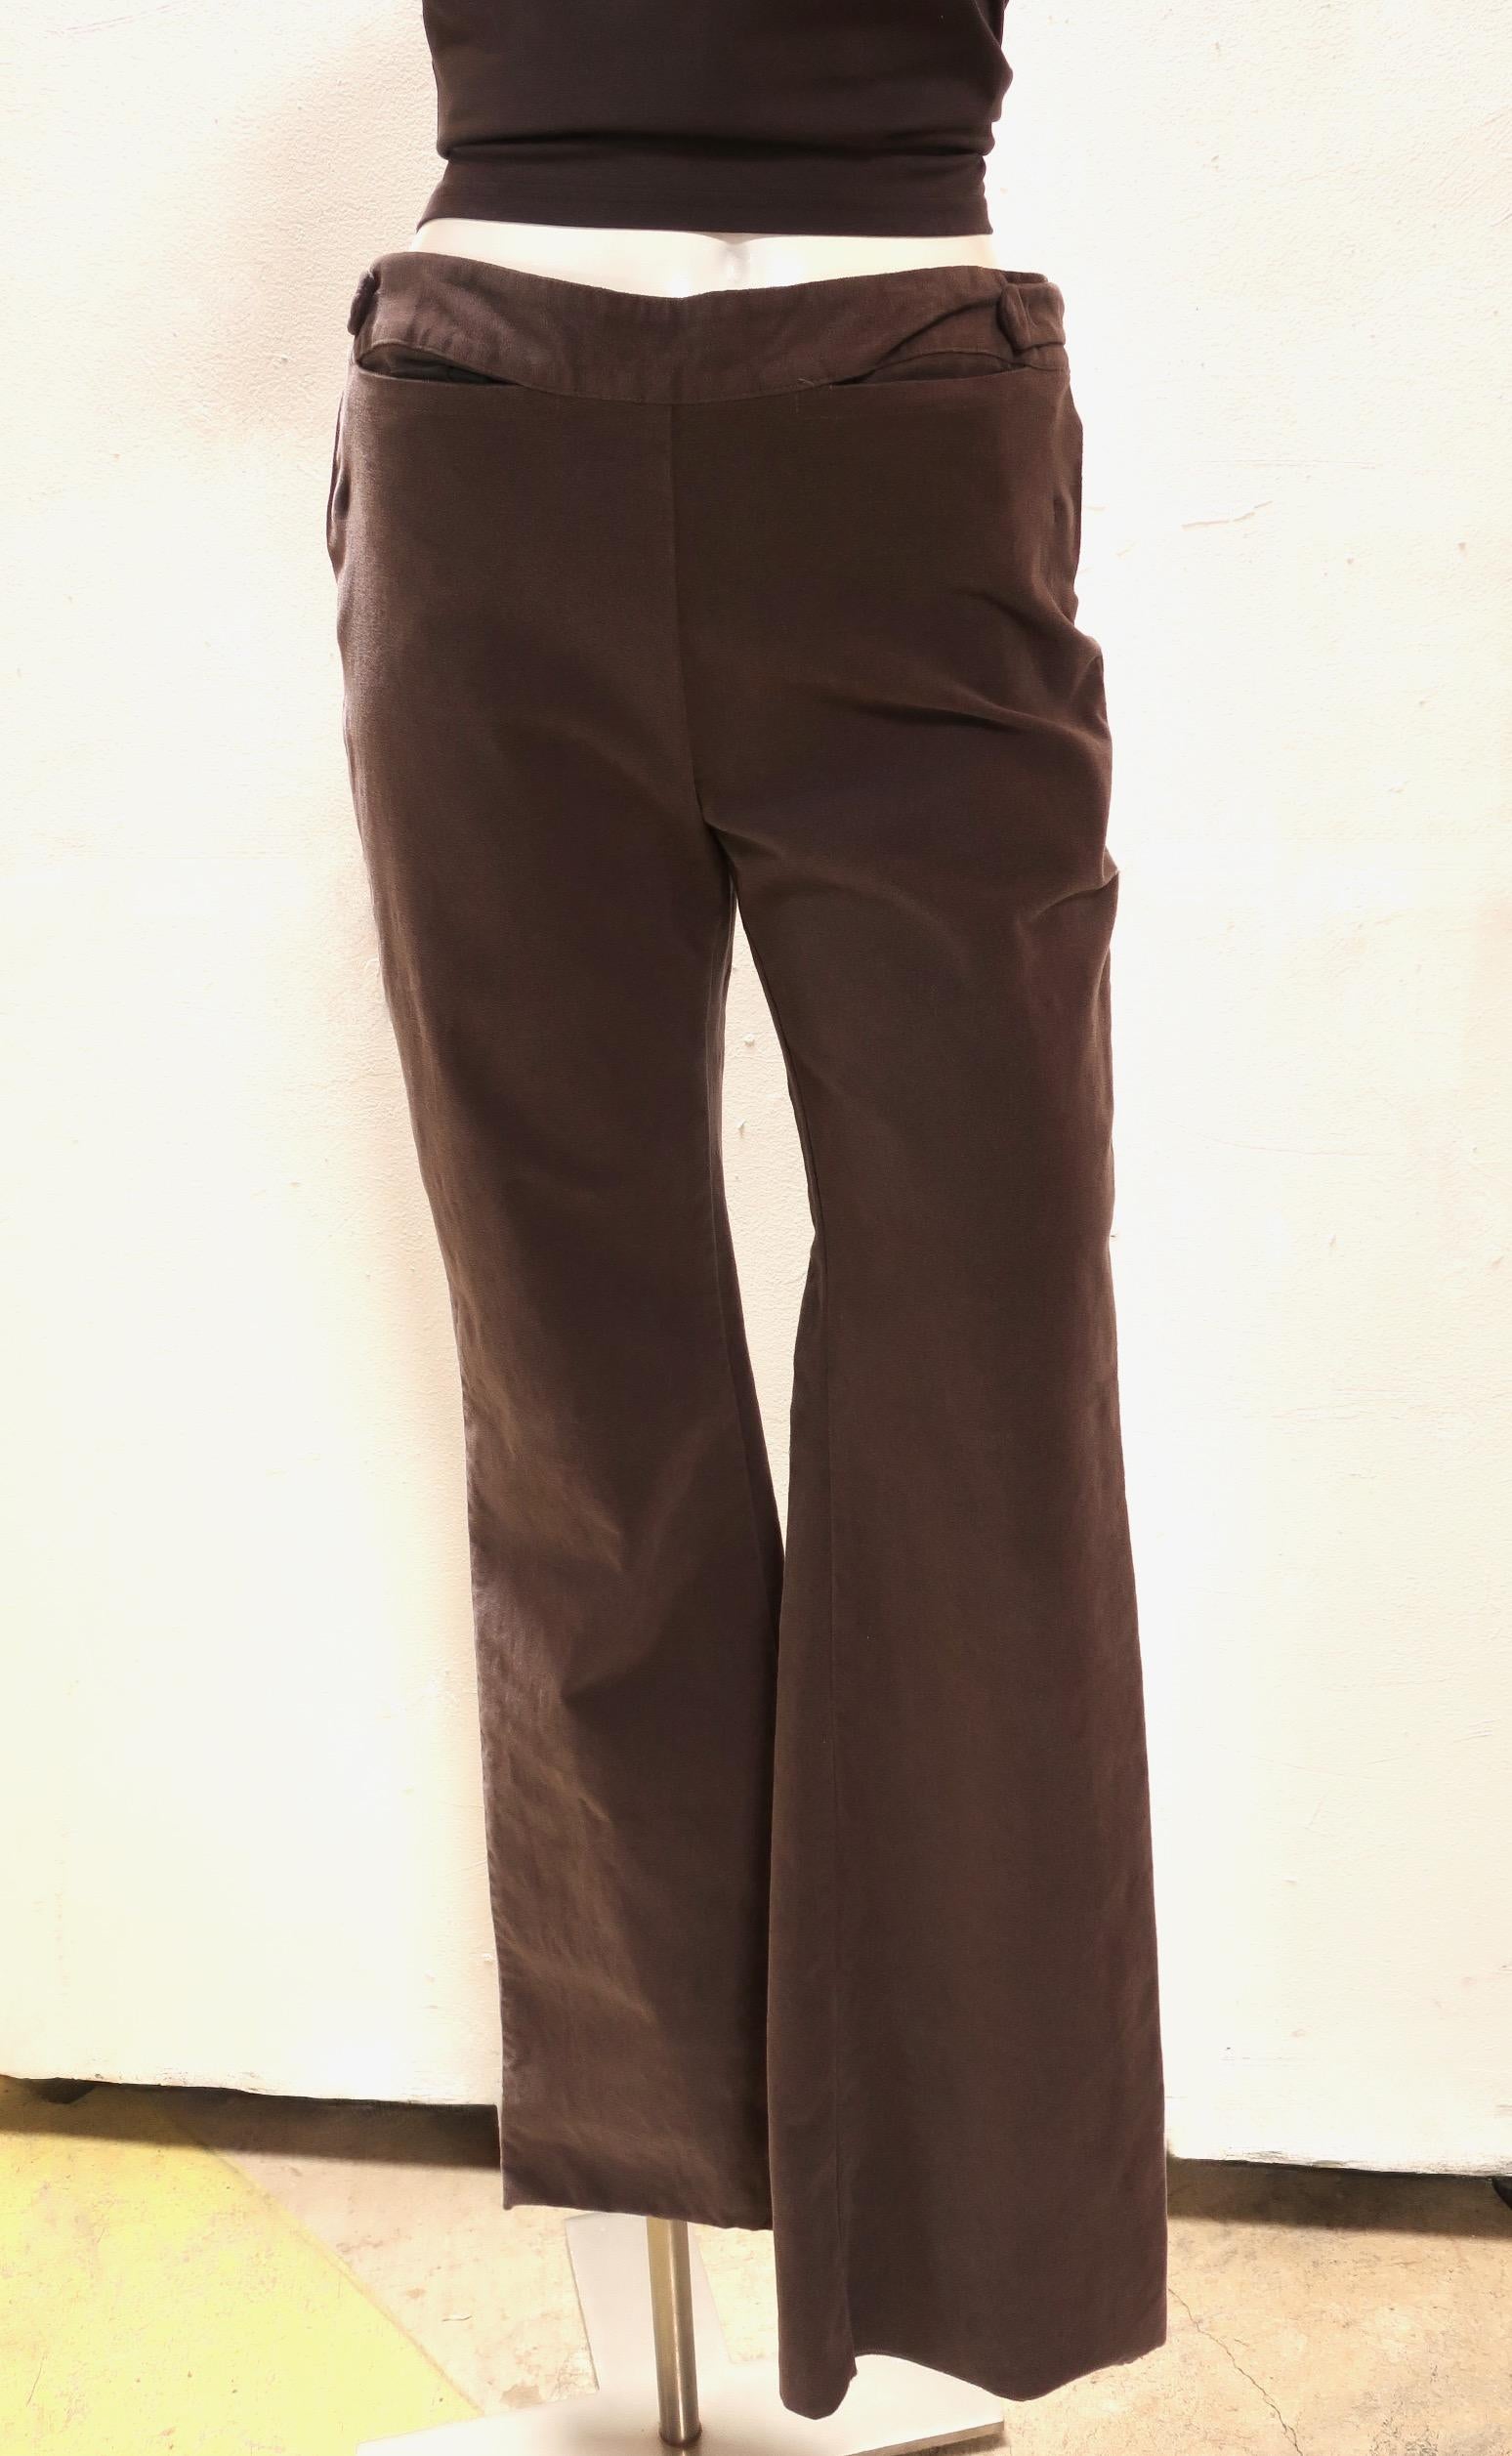 Soft flannel high cut pant from Maison Martin Margiela features wide legs for a bohemian look. Two front pockets open horizontally, just below the waistband. in the absence of a front fly, the pants close at the sides with buckles and adjustable